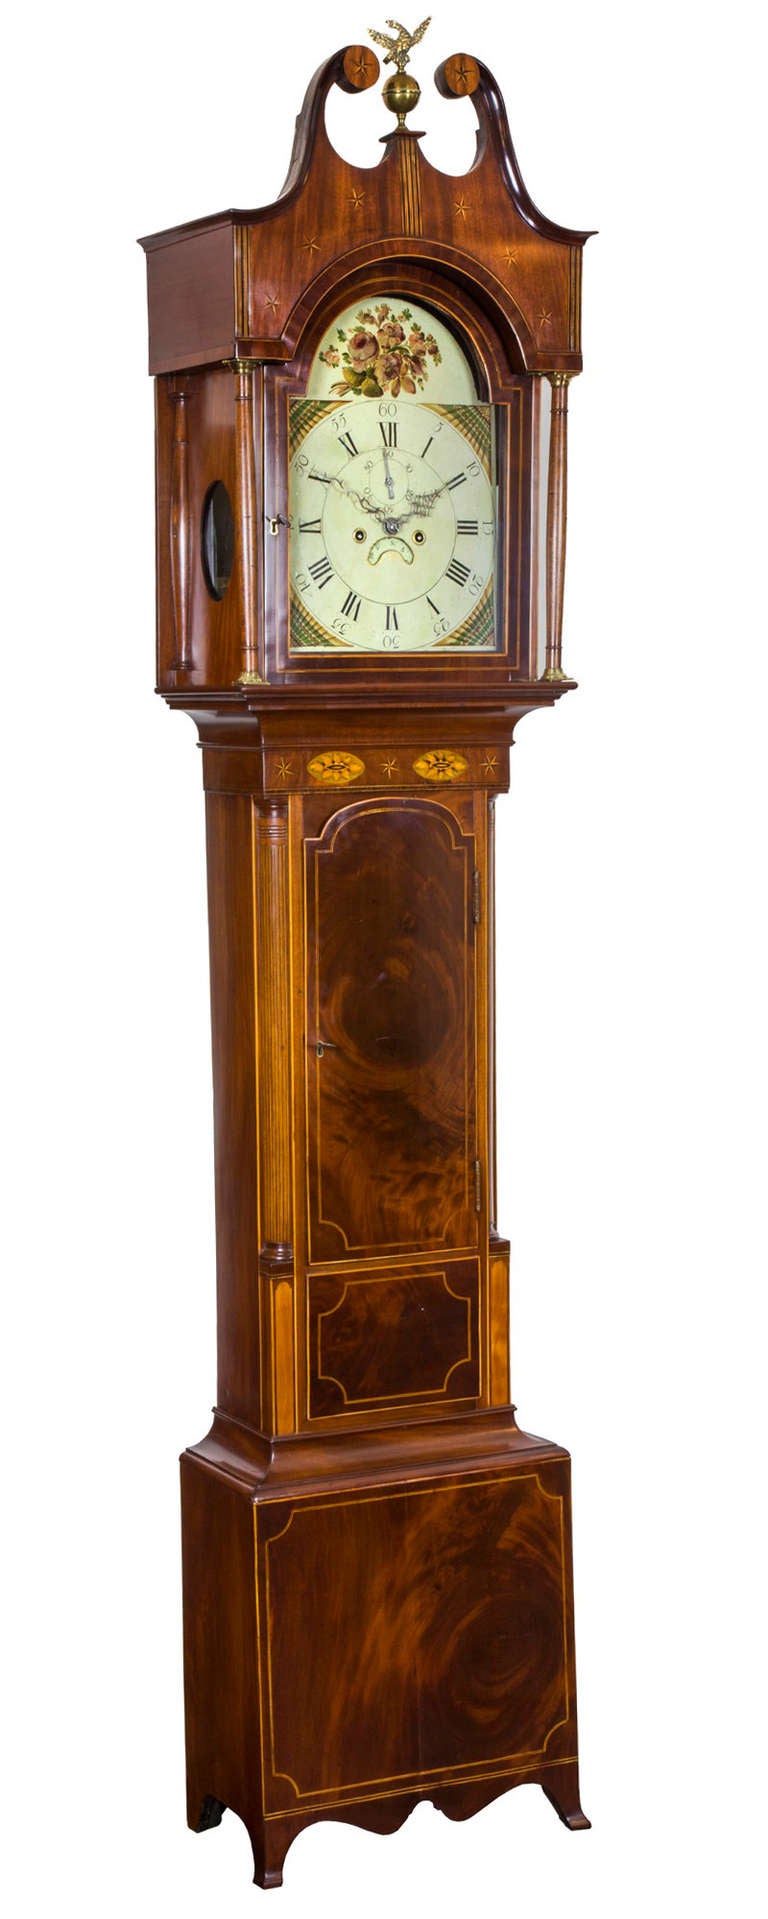 While this clock is unsigned, it is readily attributable to Taylor as several of this grouping of clocks have been documented, all unsigned. There is one in the White House, and attached, please find another example offered by Gary Sullivan in 2013.